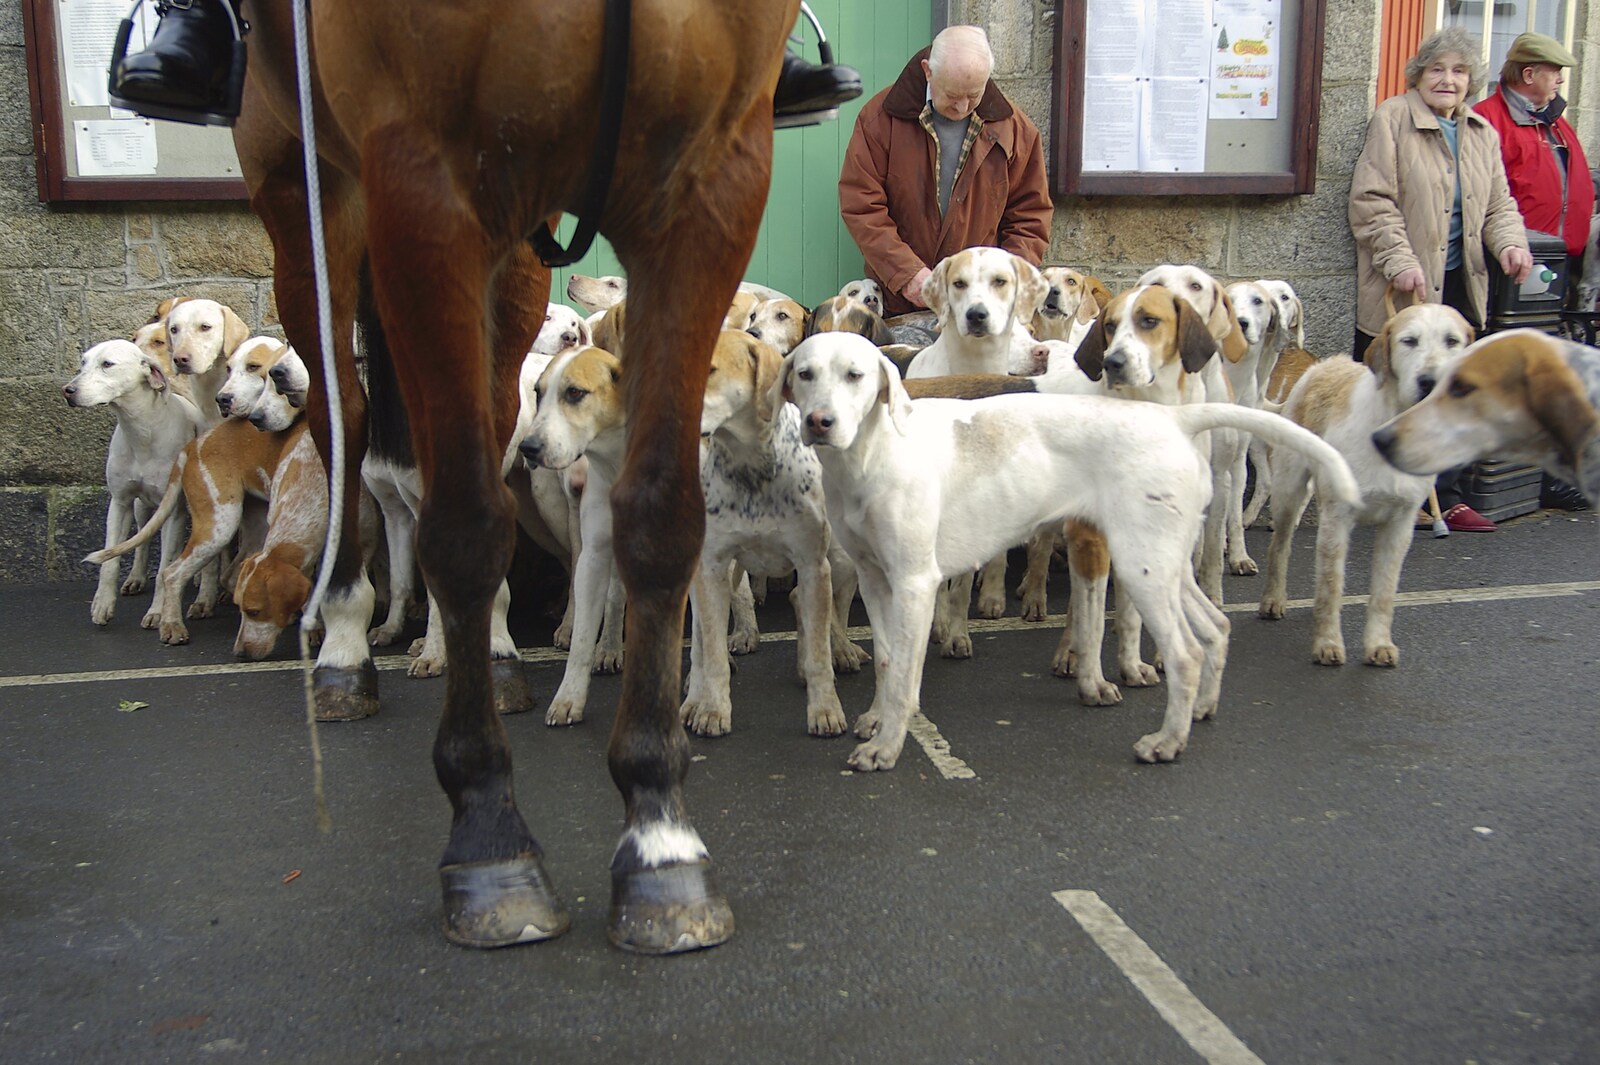 A dog's-eye view of the horses from A Boxing Day Hunt, Chagford, Devon - 26th December 2007